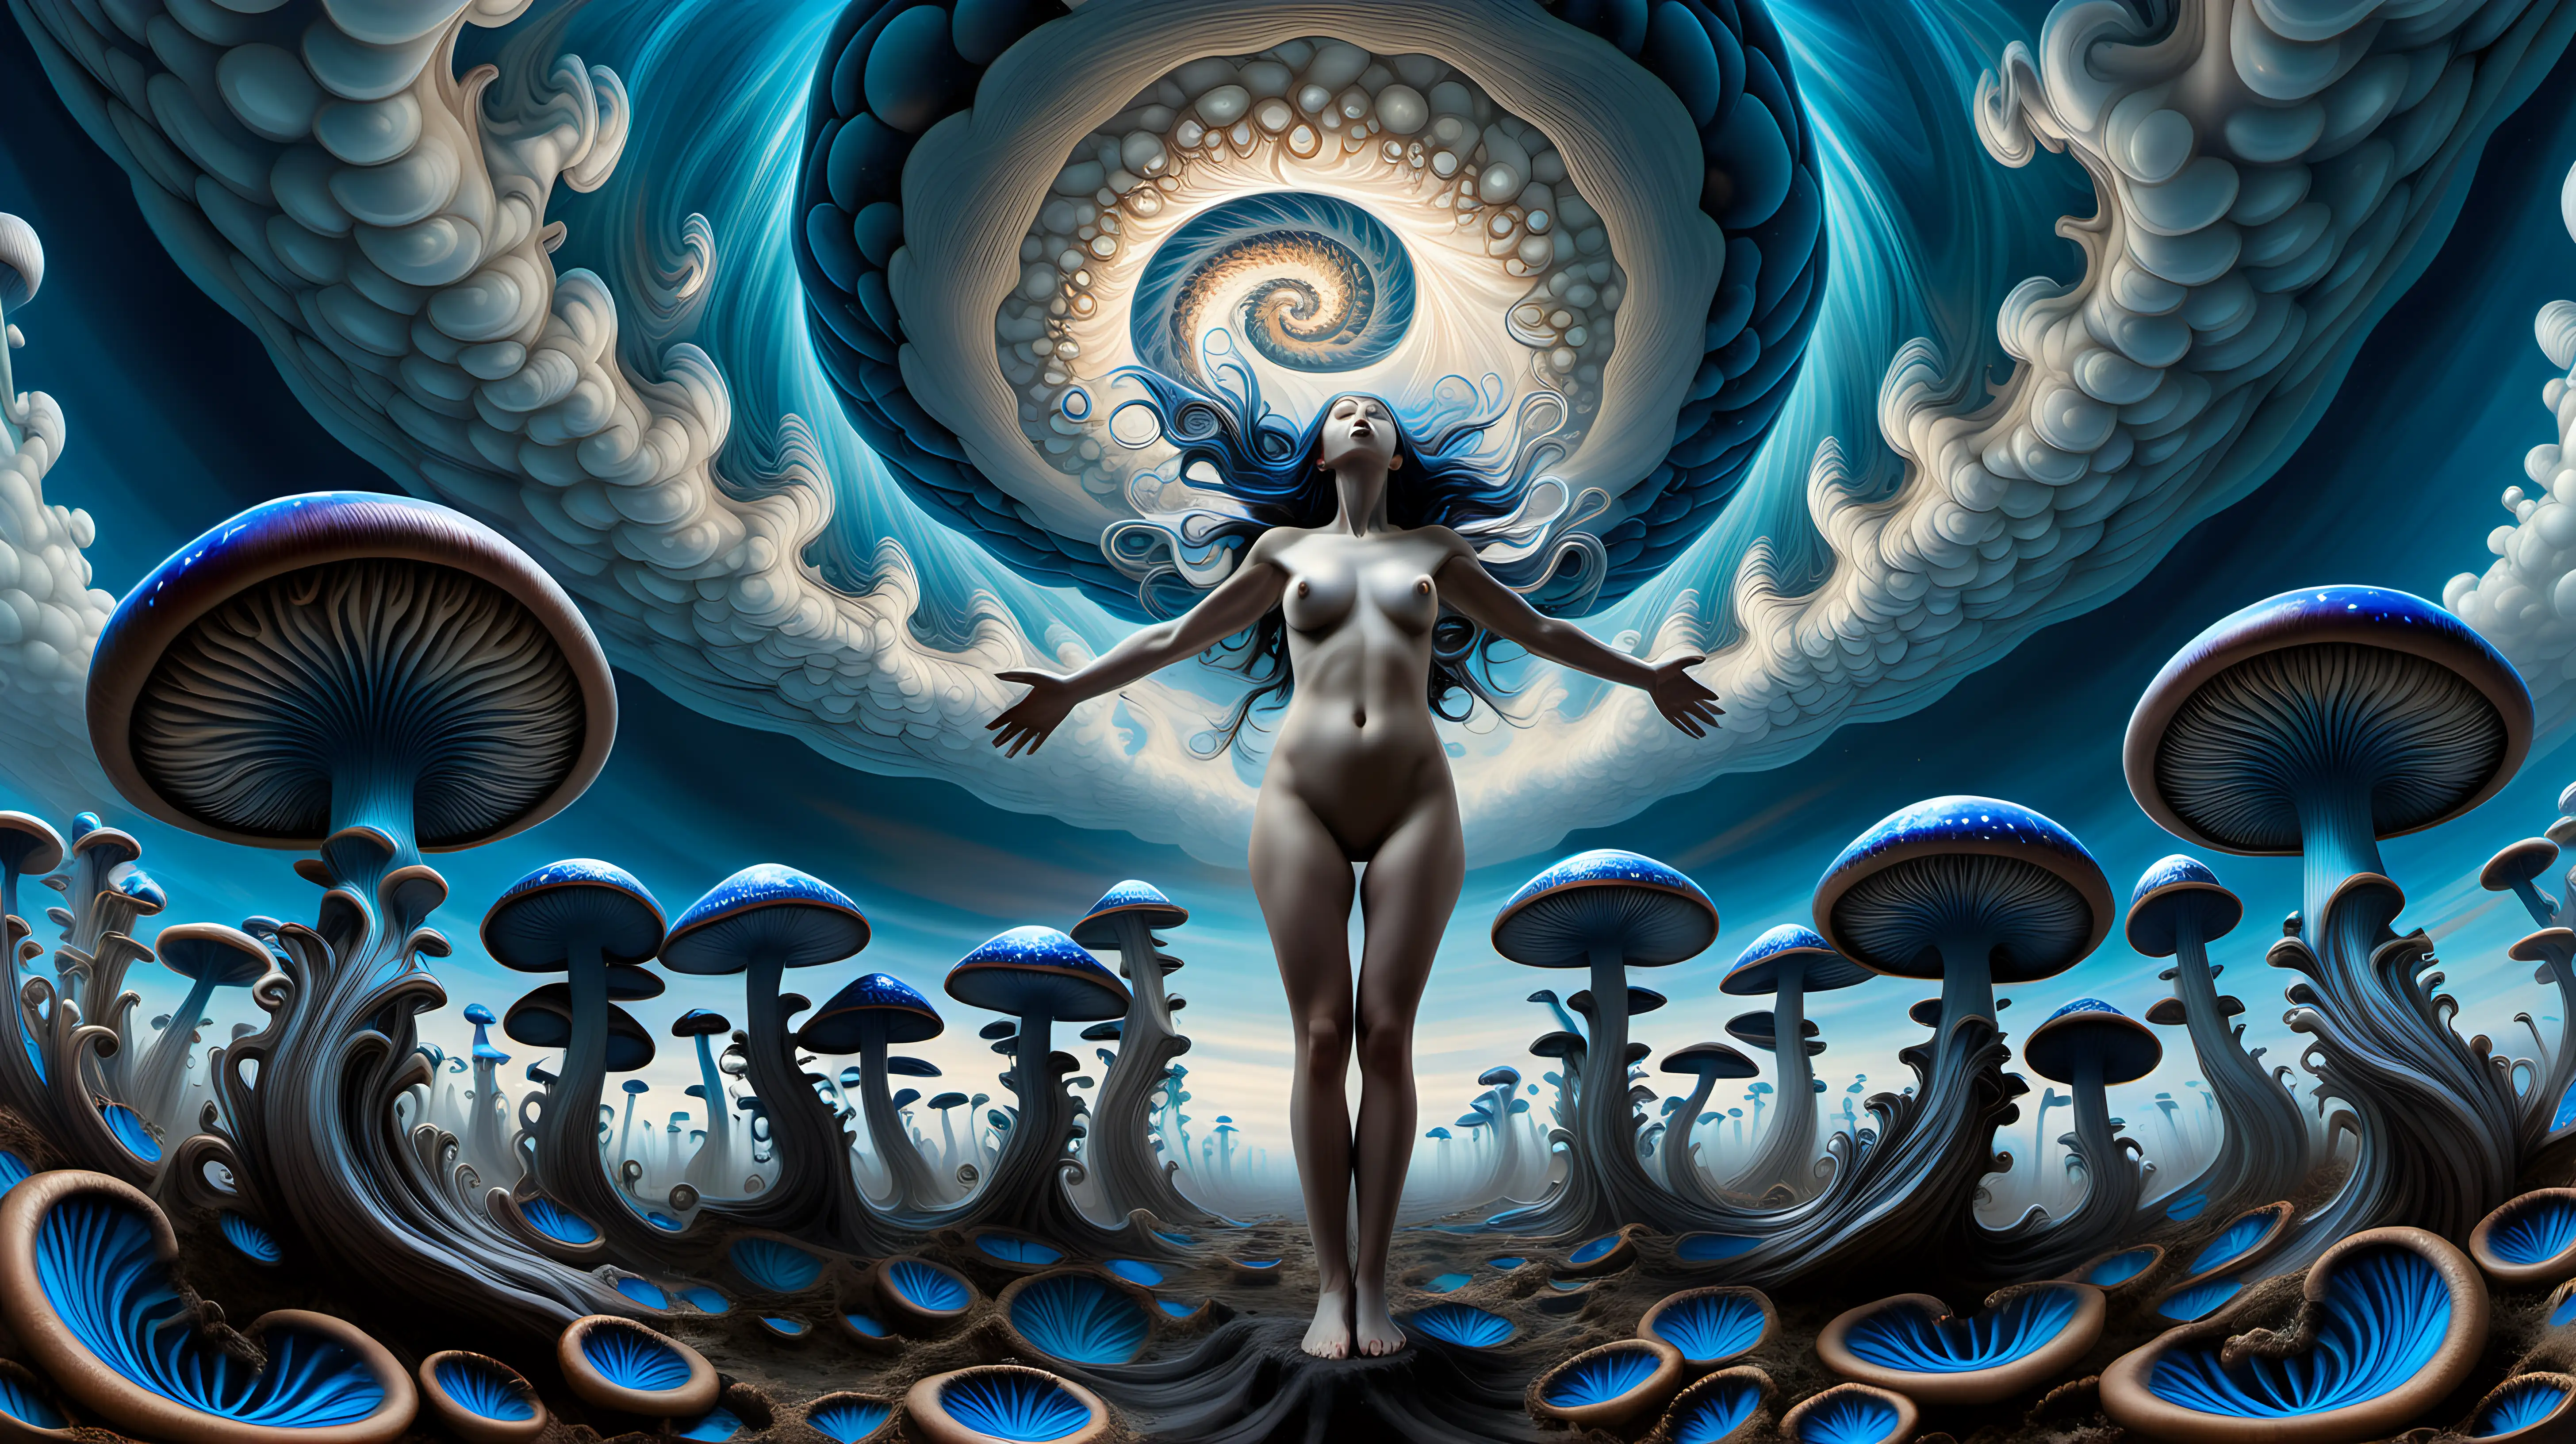 Ethereal Nude Figure Amidst Psychedelic Fractal Sky with Blue Mushrooms